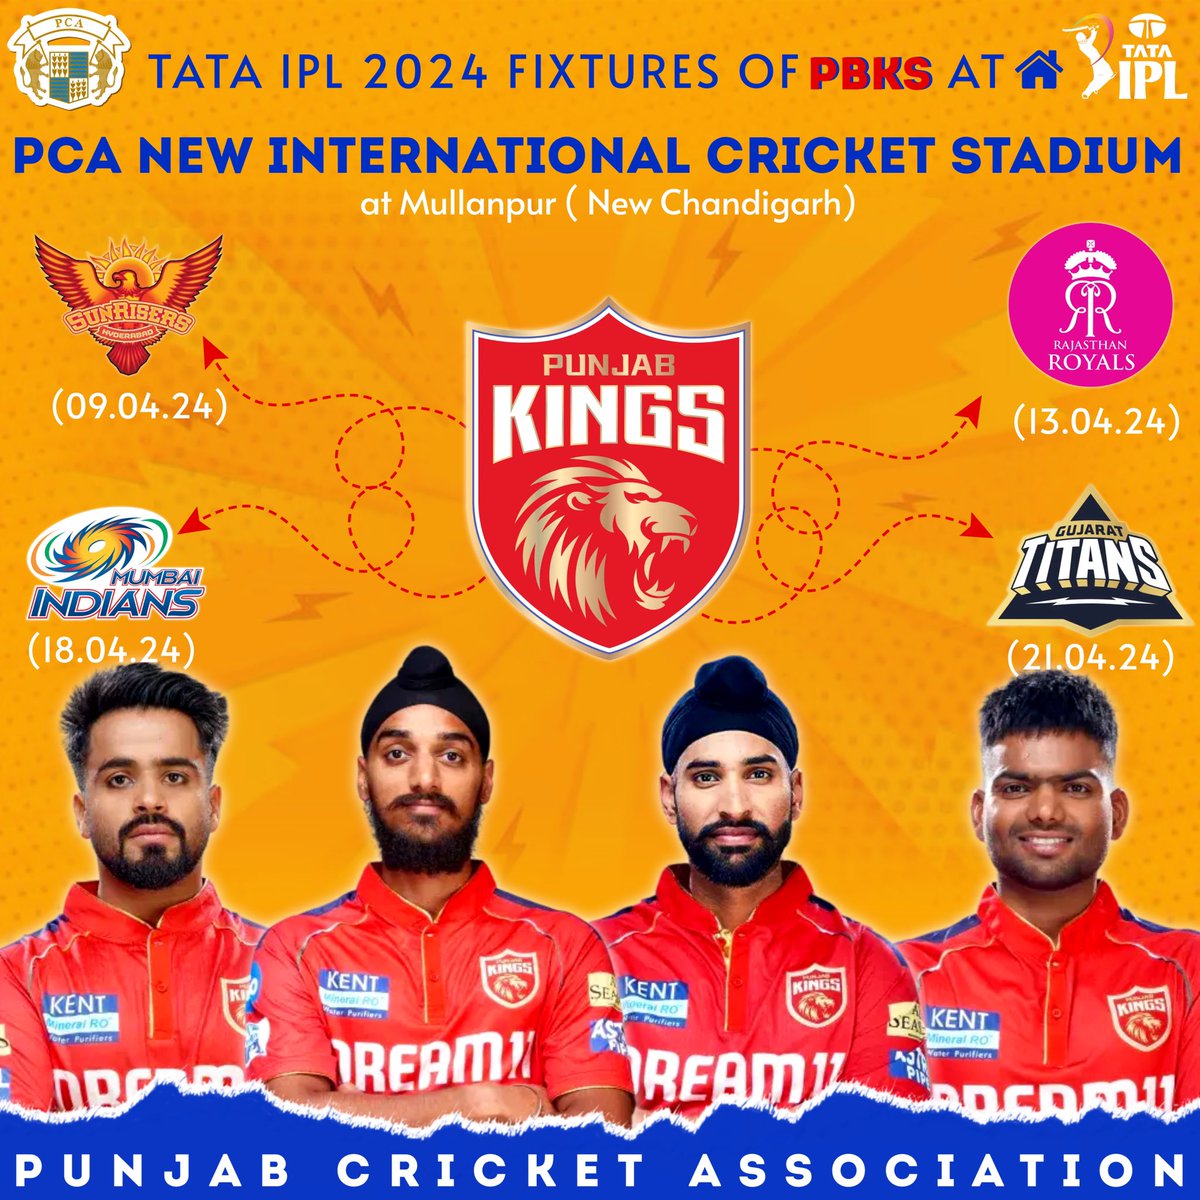 Cricket Counts: Excitement comes closer home, with four matches of the Tata IPL 2024 scheduled from April 9 to 21 at the world-class PCA New International Cricket Stadium. Gear up for the live action and thrilling contests.